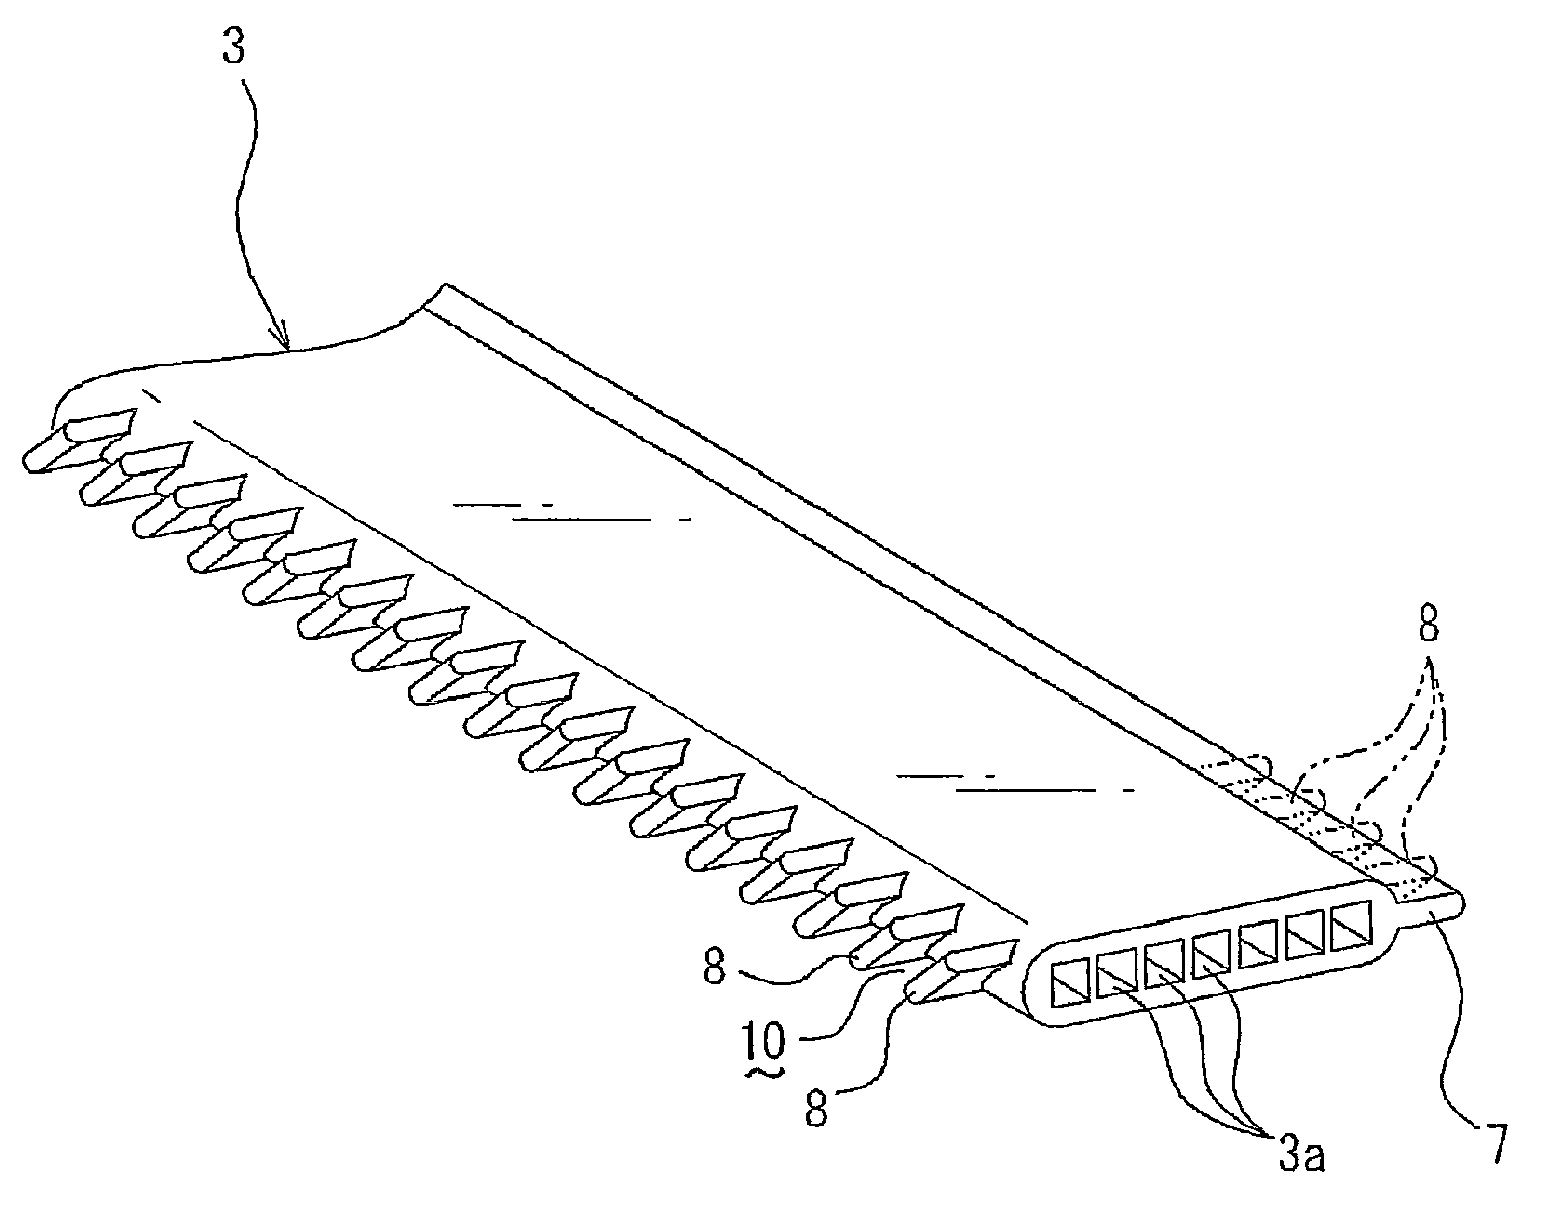 Drainage structure of corrugated fin-type heat exchanger